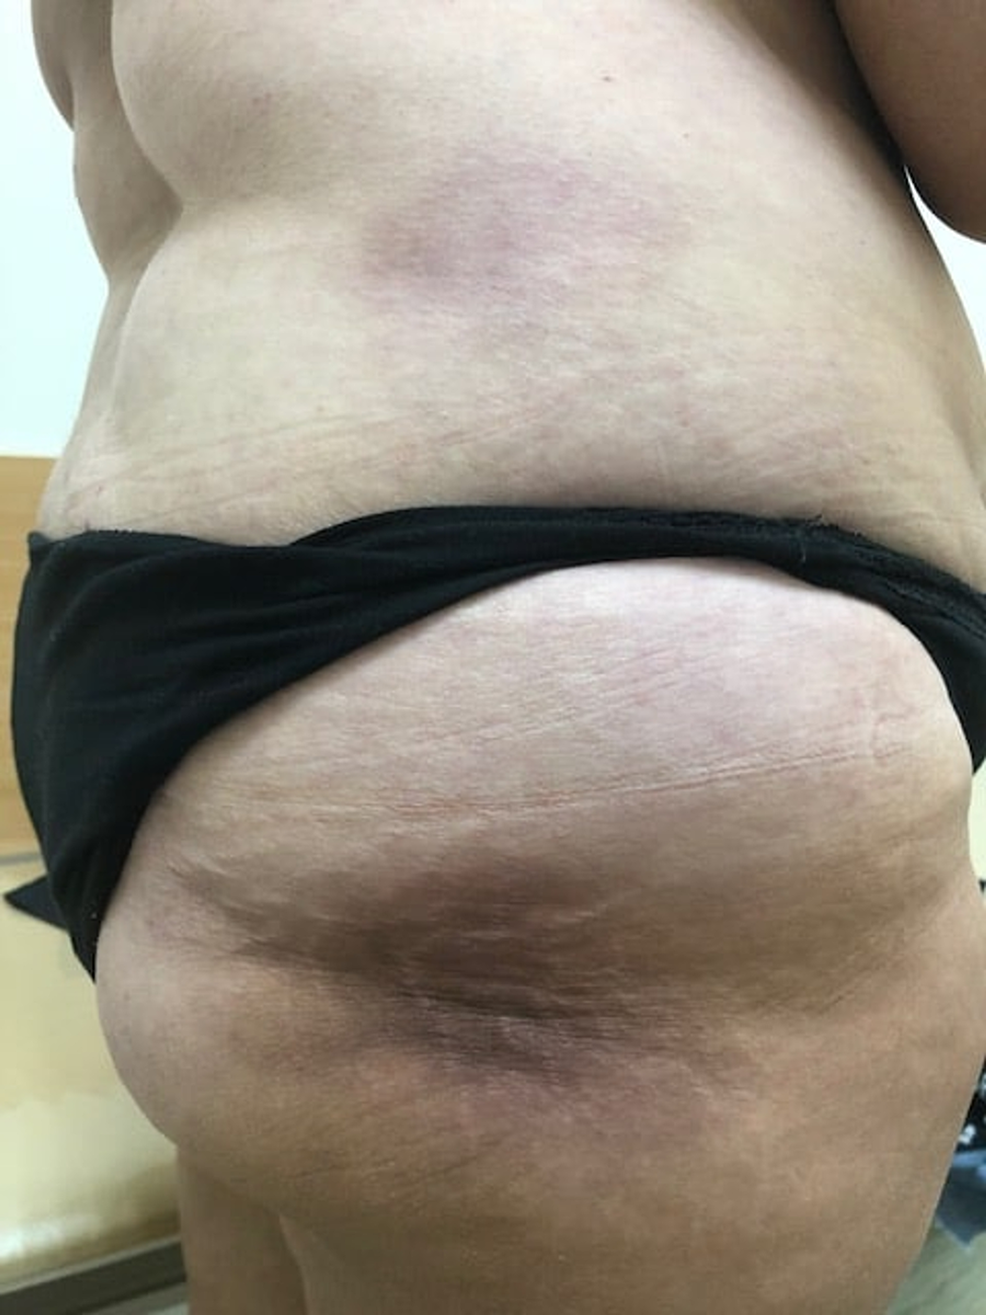 Patient’s-skin-changes:-a-rounded-purple-cyanotic-painless-dense-formation-is-seen-on-the-right-lateral-surface-of-the-trunk-and-buttock.